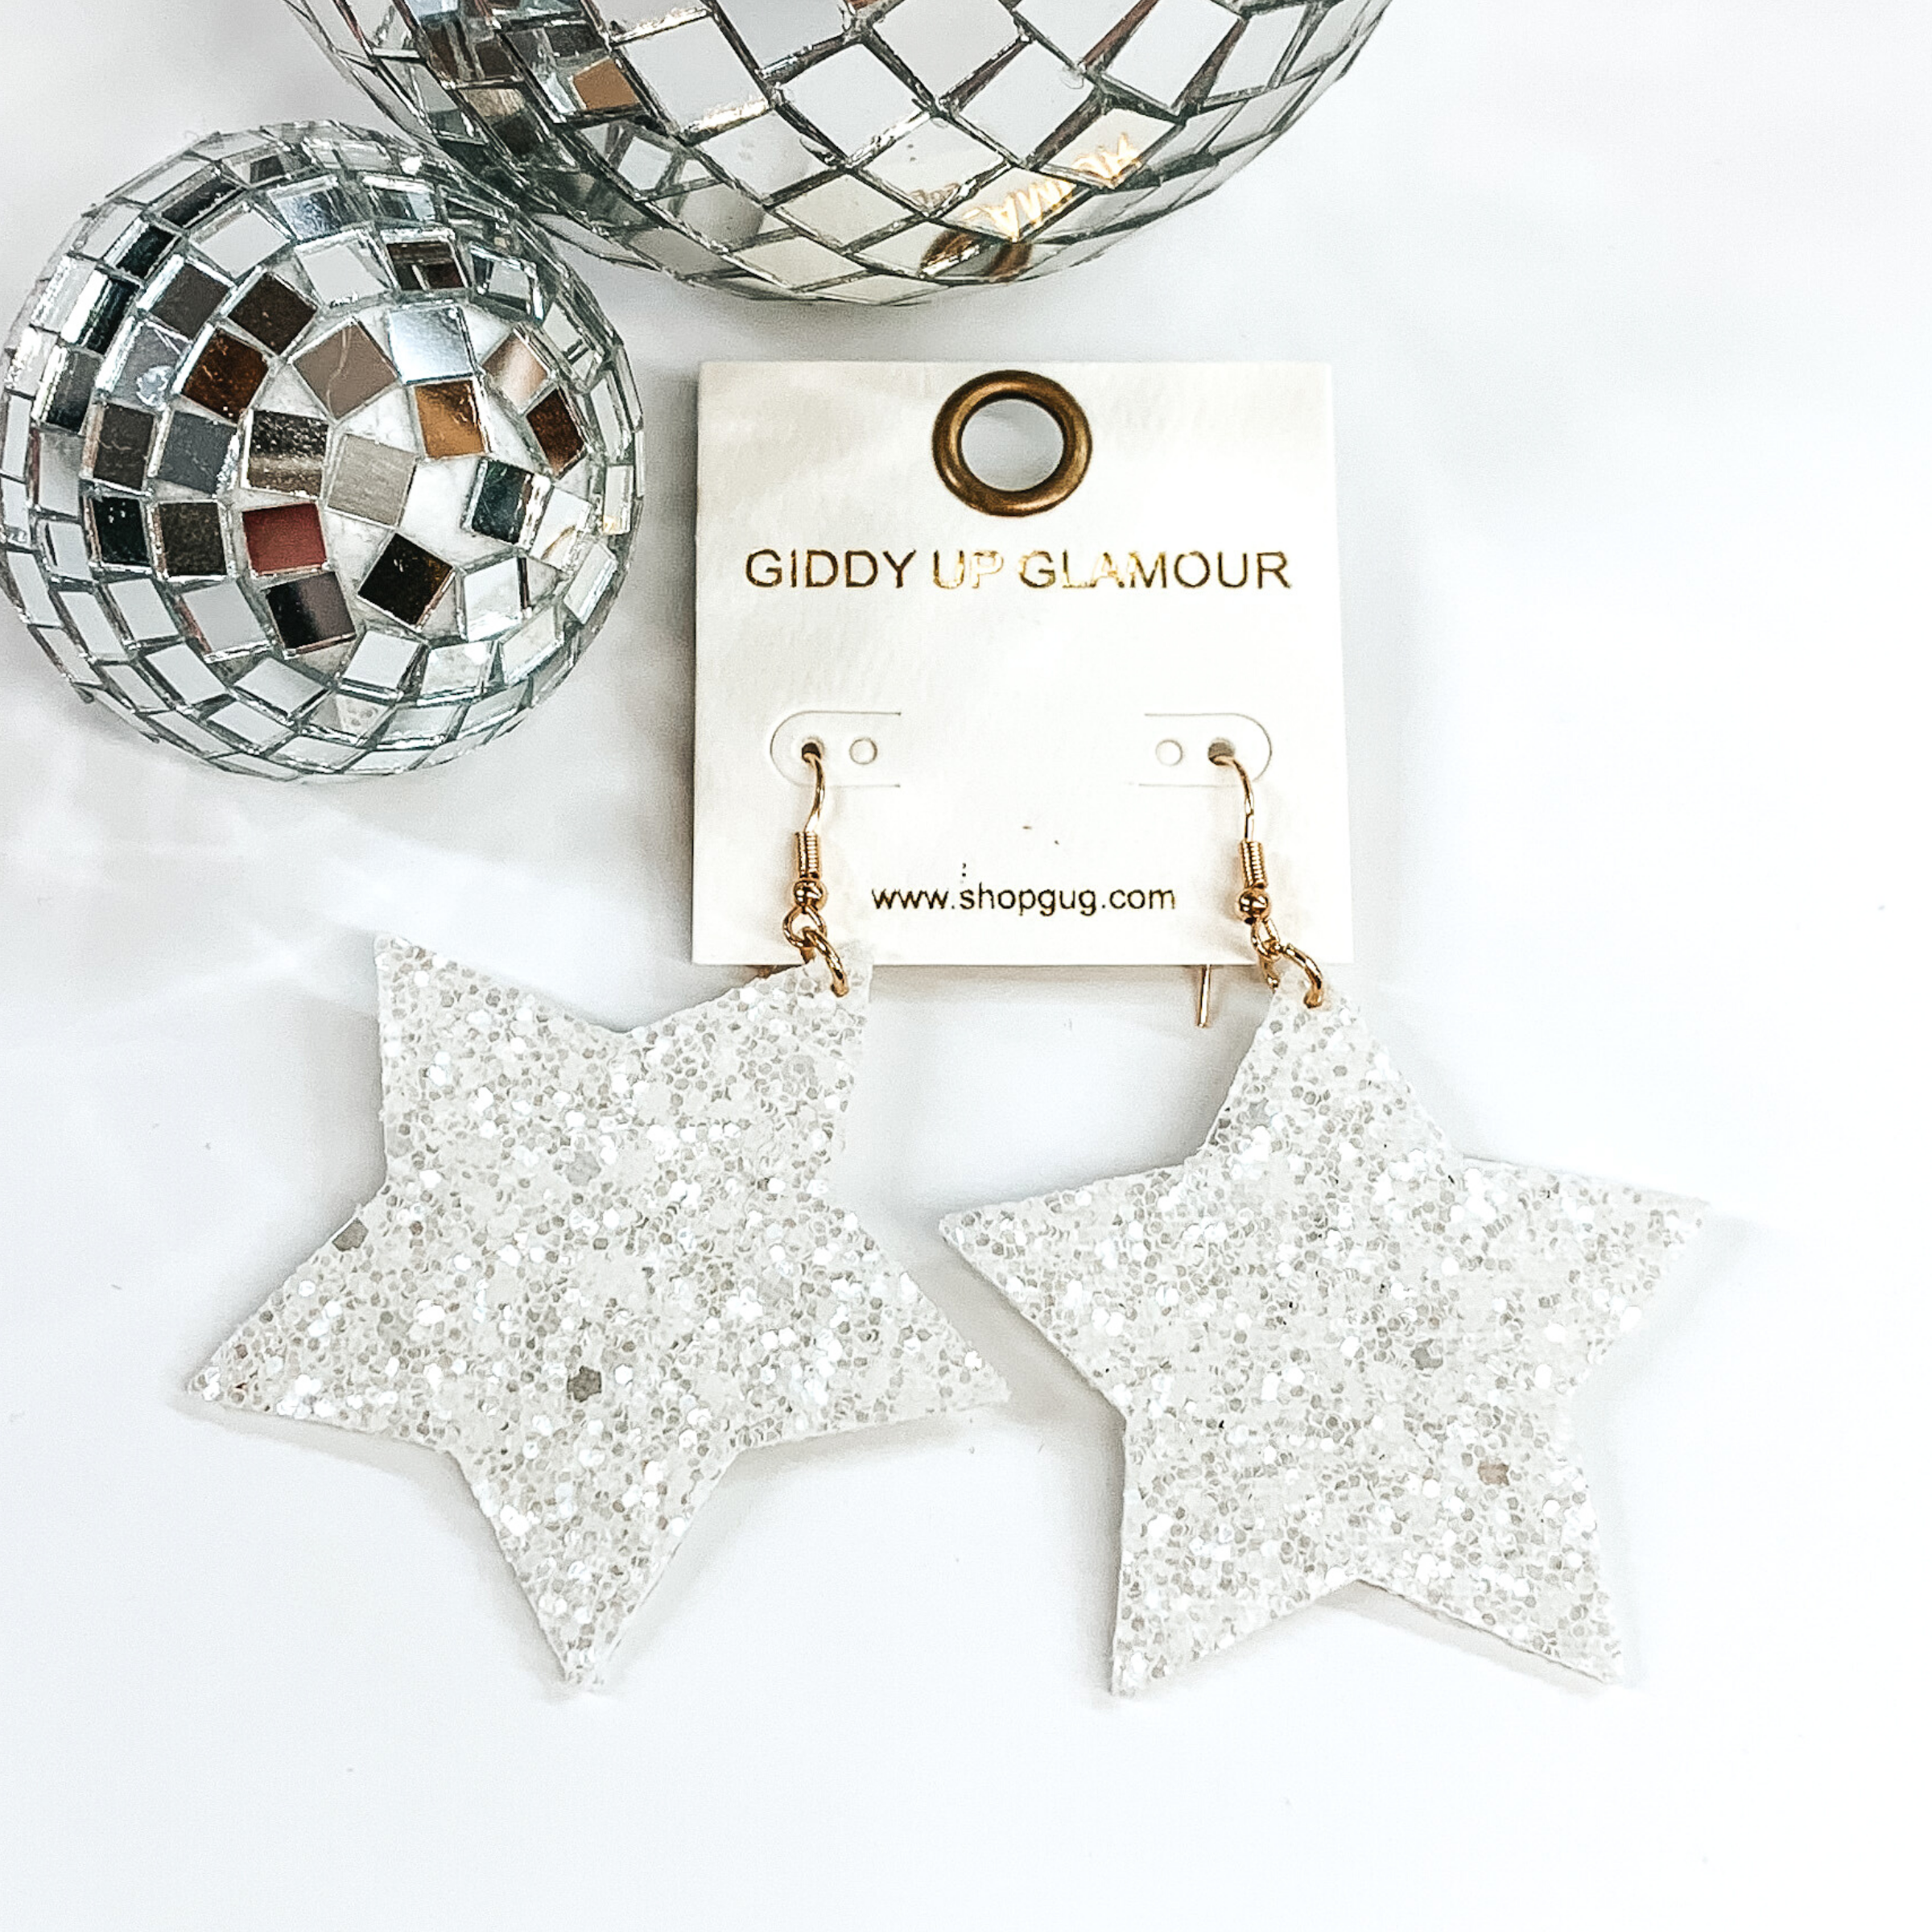 Glitter star dangle earrings in white with a gold earrings hook. These earrings are pictured on a white background with a disco ball at the top of the picture.